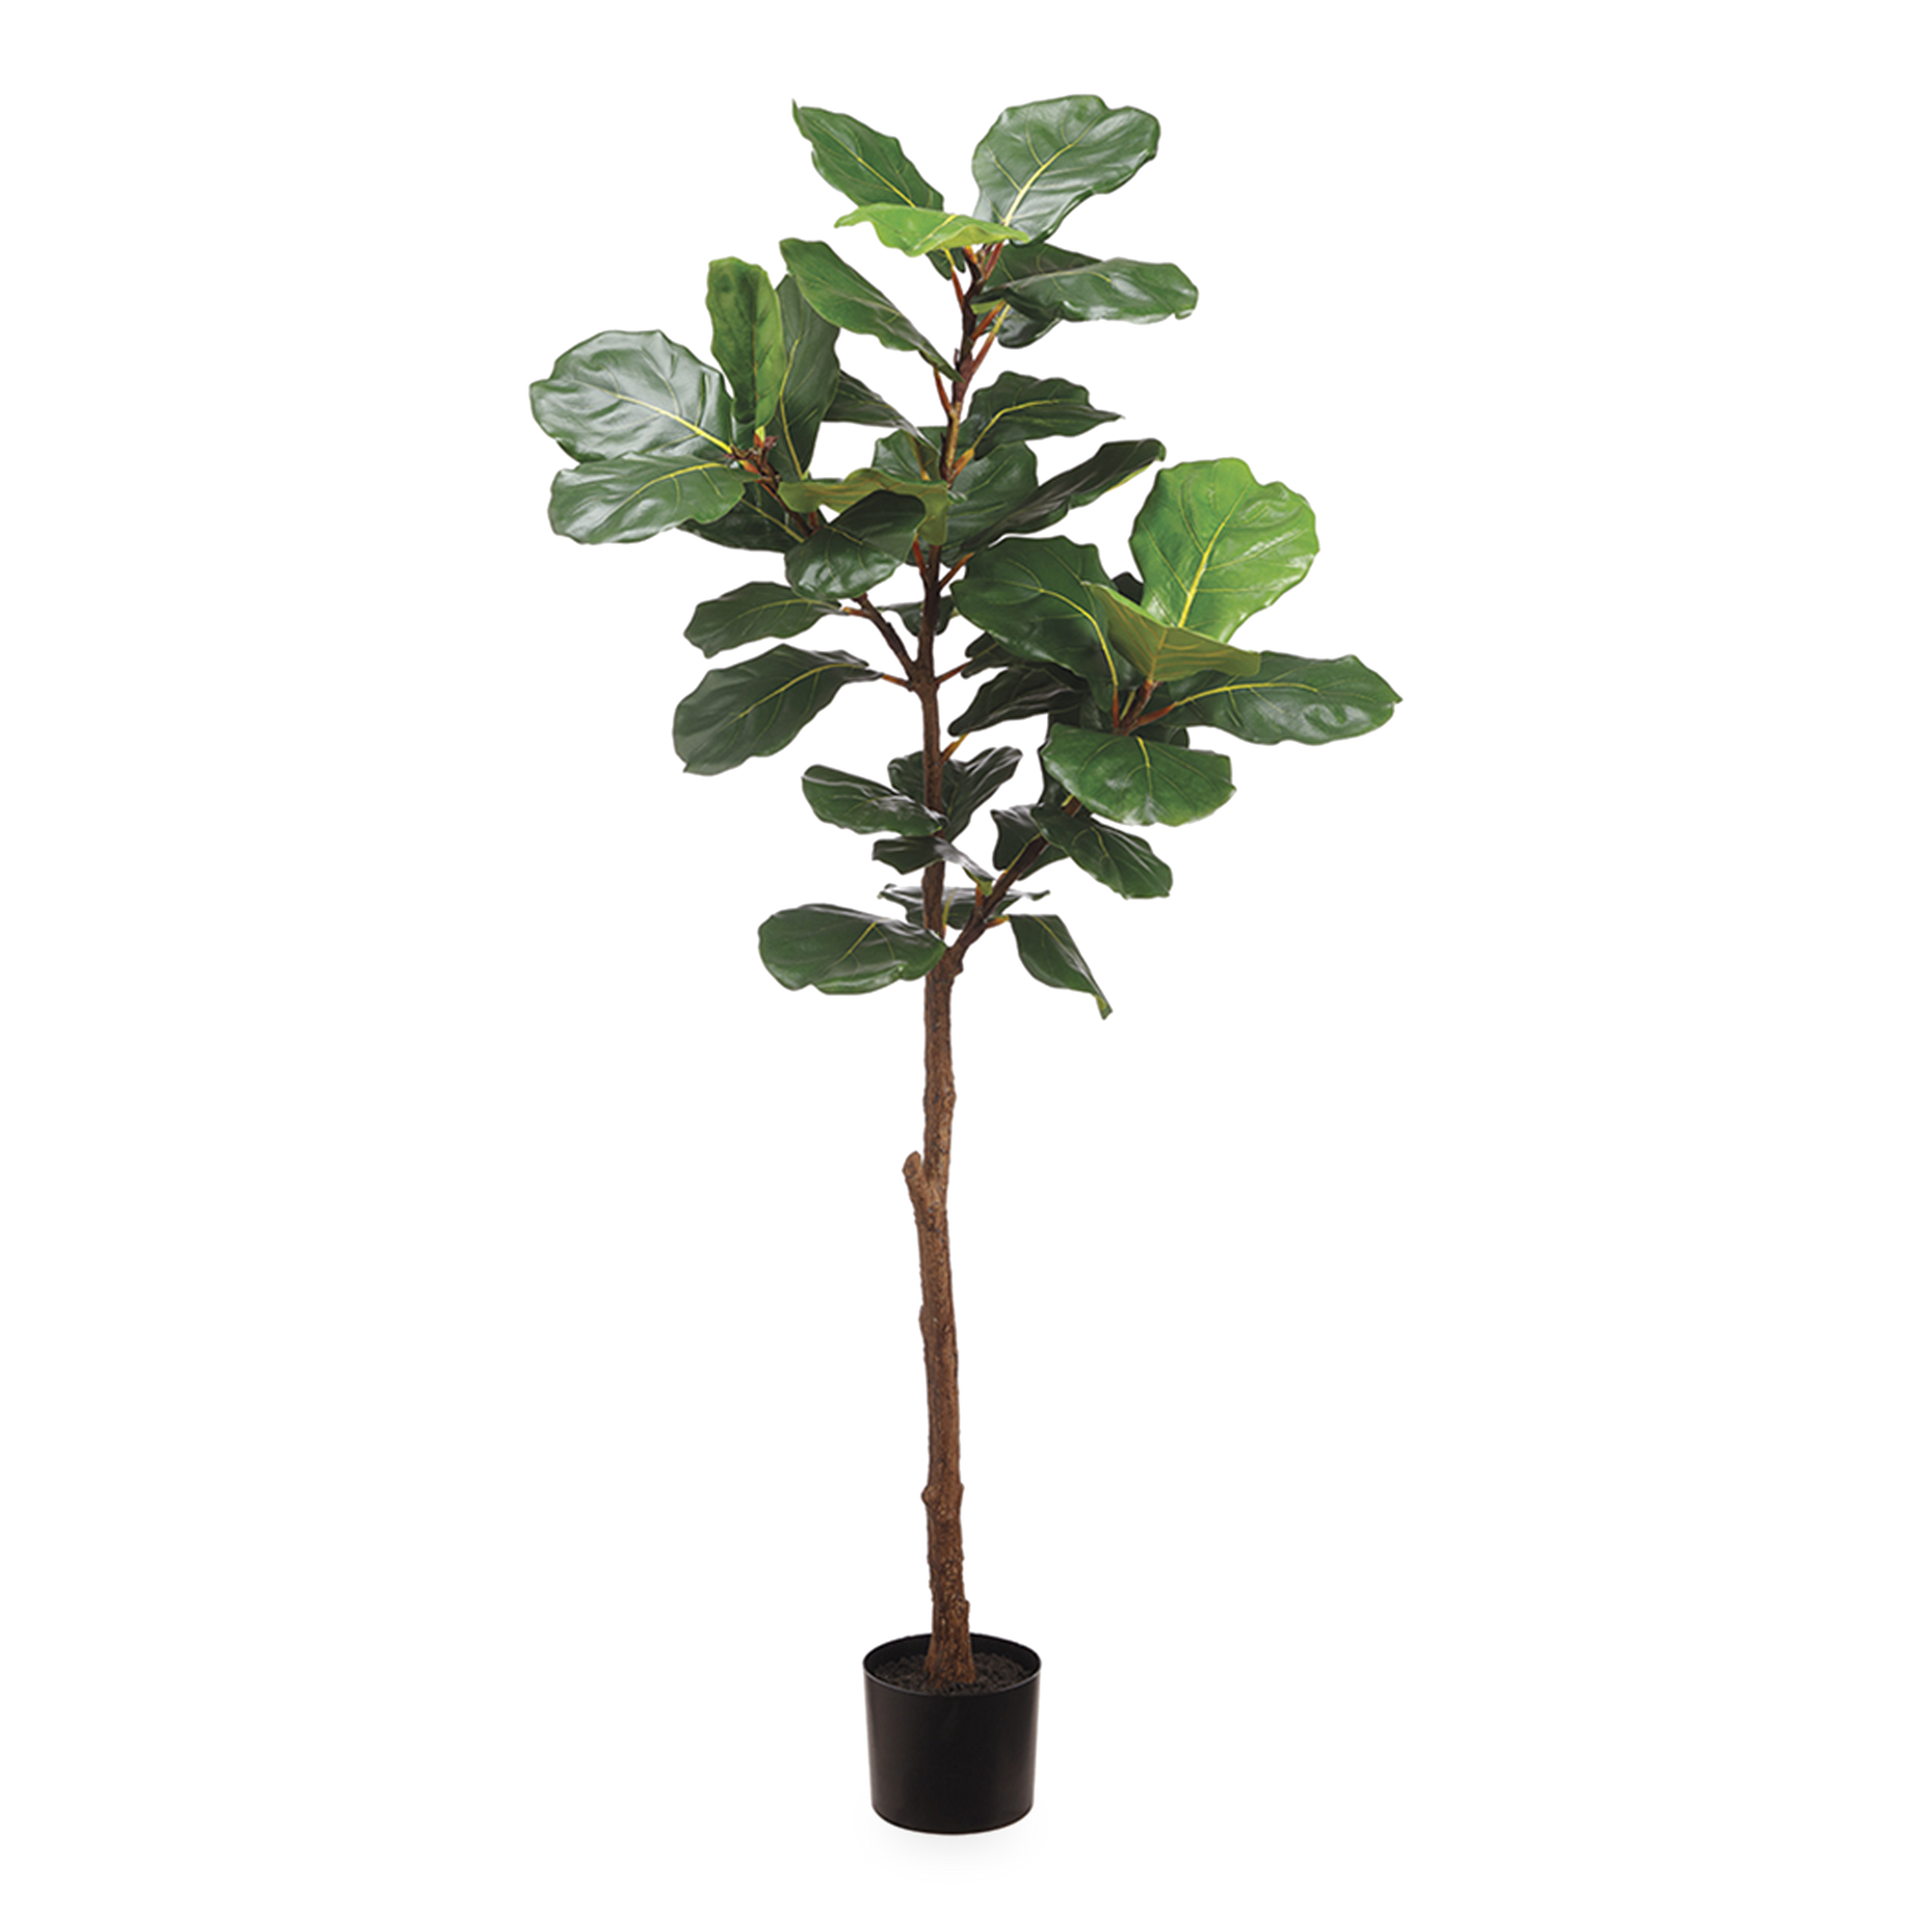 This elegant faux Fiddle Leaf Tree stands 6 feet tall with a kempt body and lush foliage at the top.